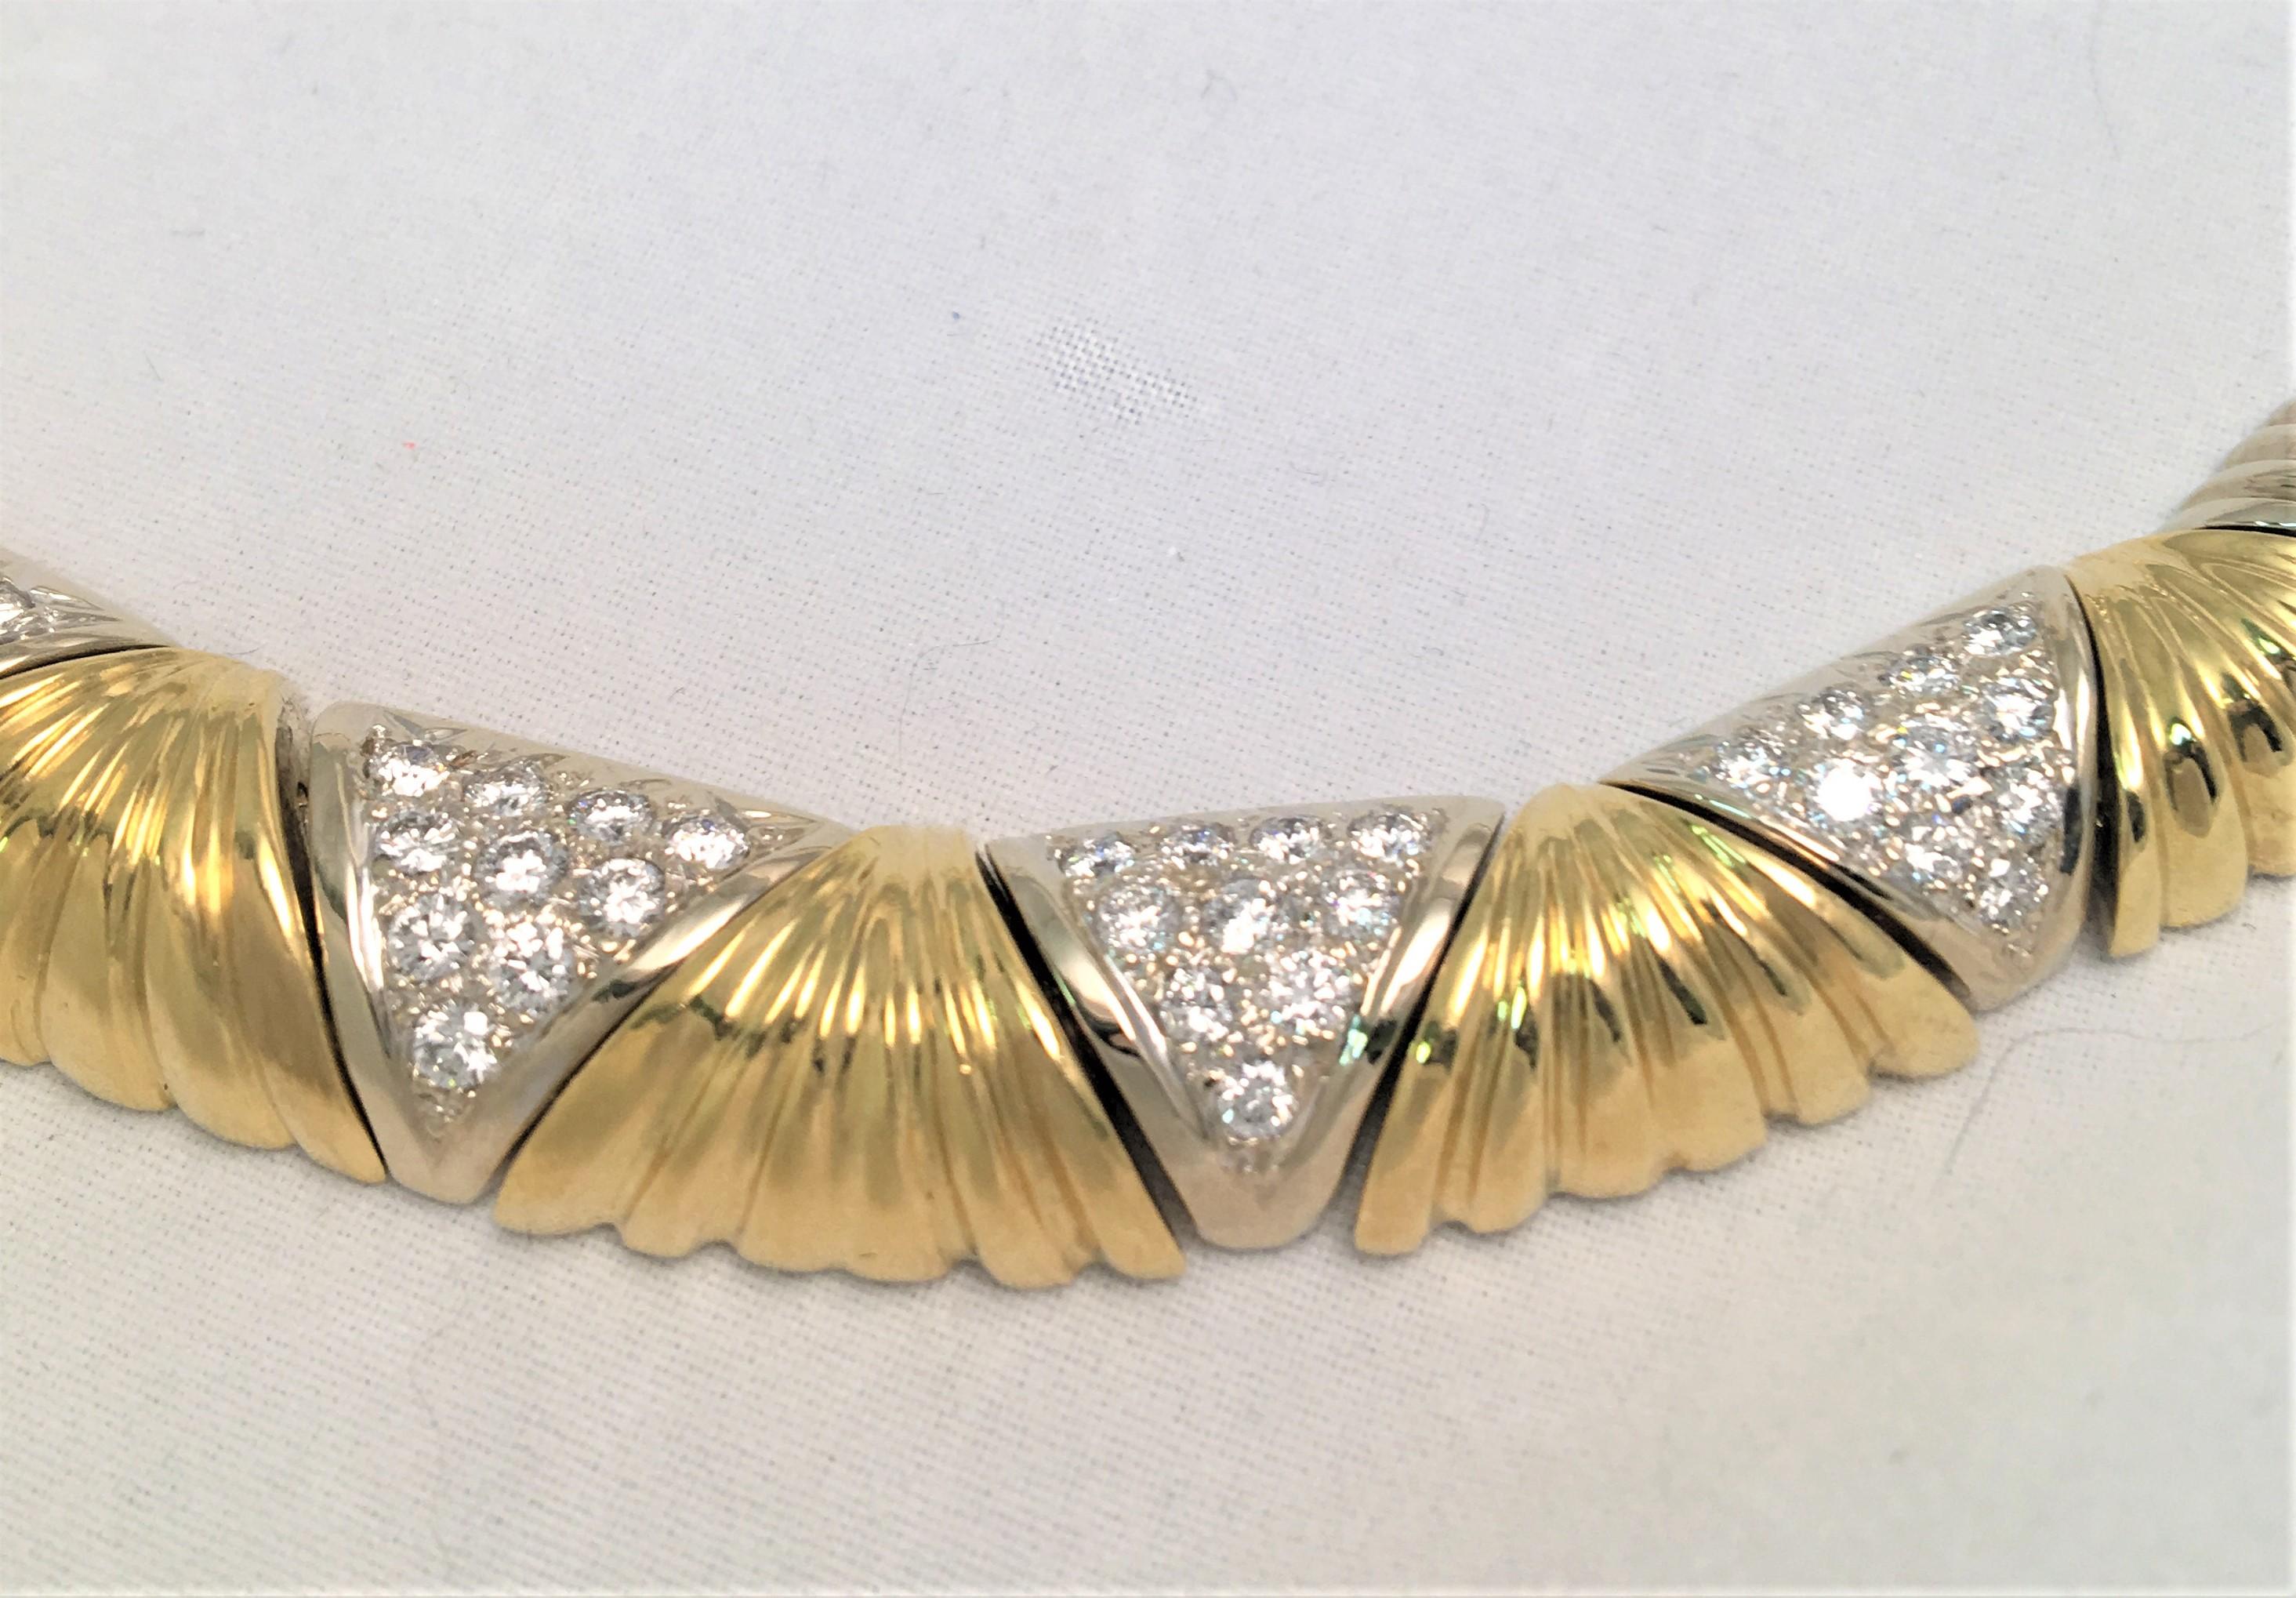 This necklace is nothing but fabulous!  
Designer Sal Praschnik
18 karat yellow and white gold, weighing approximately 75dwt
55 rectangular shaped pieces alternating in 18k white and 18k yellow gold
Six rectangles each in white gold have 10 round